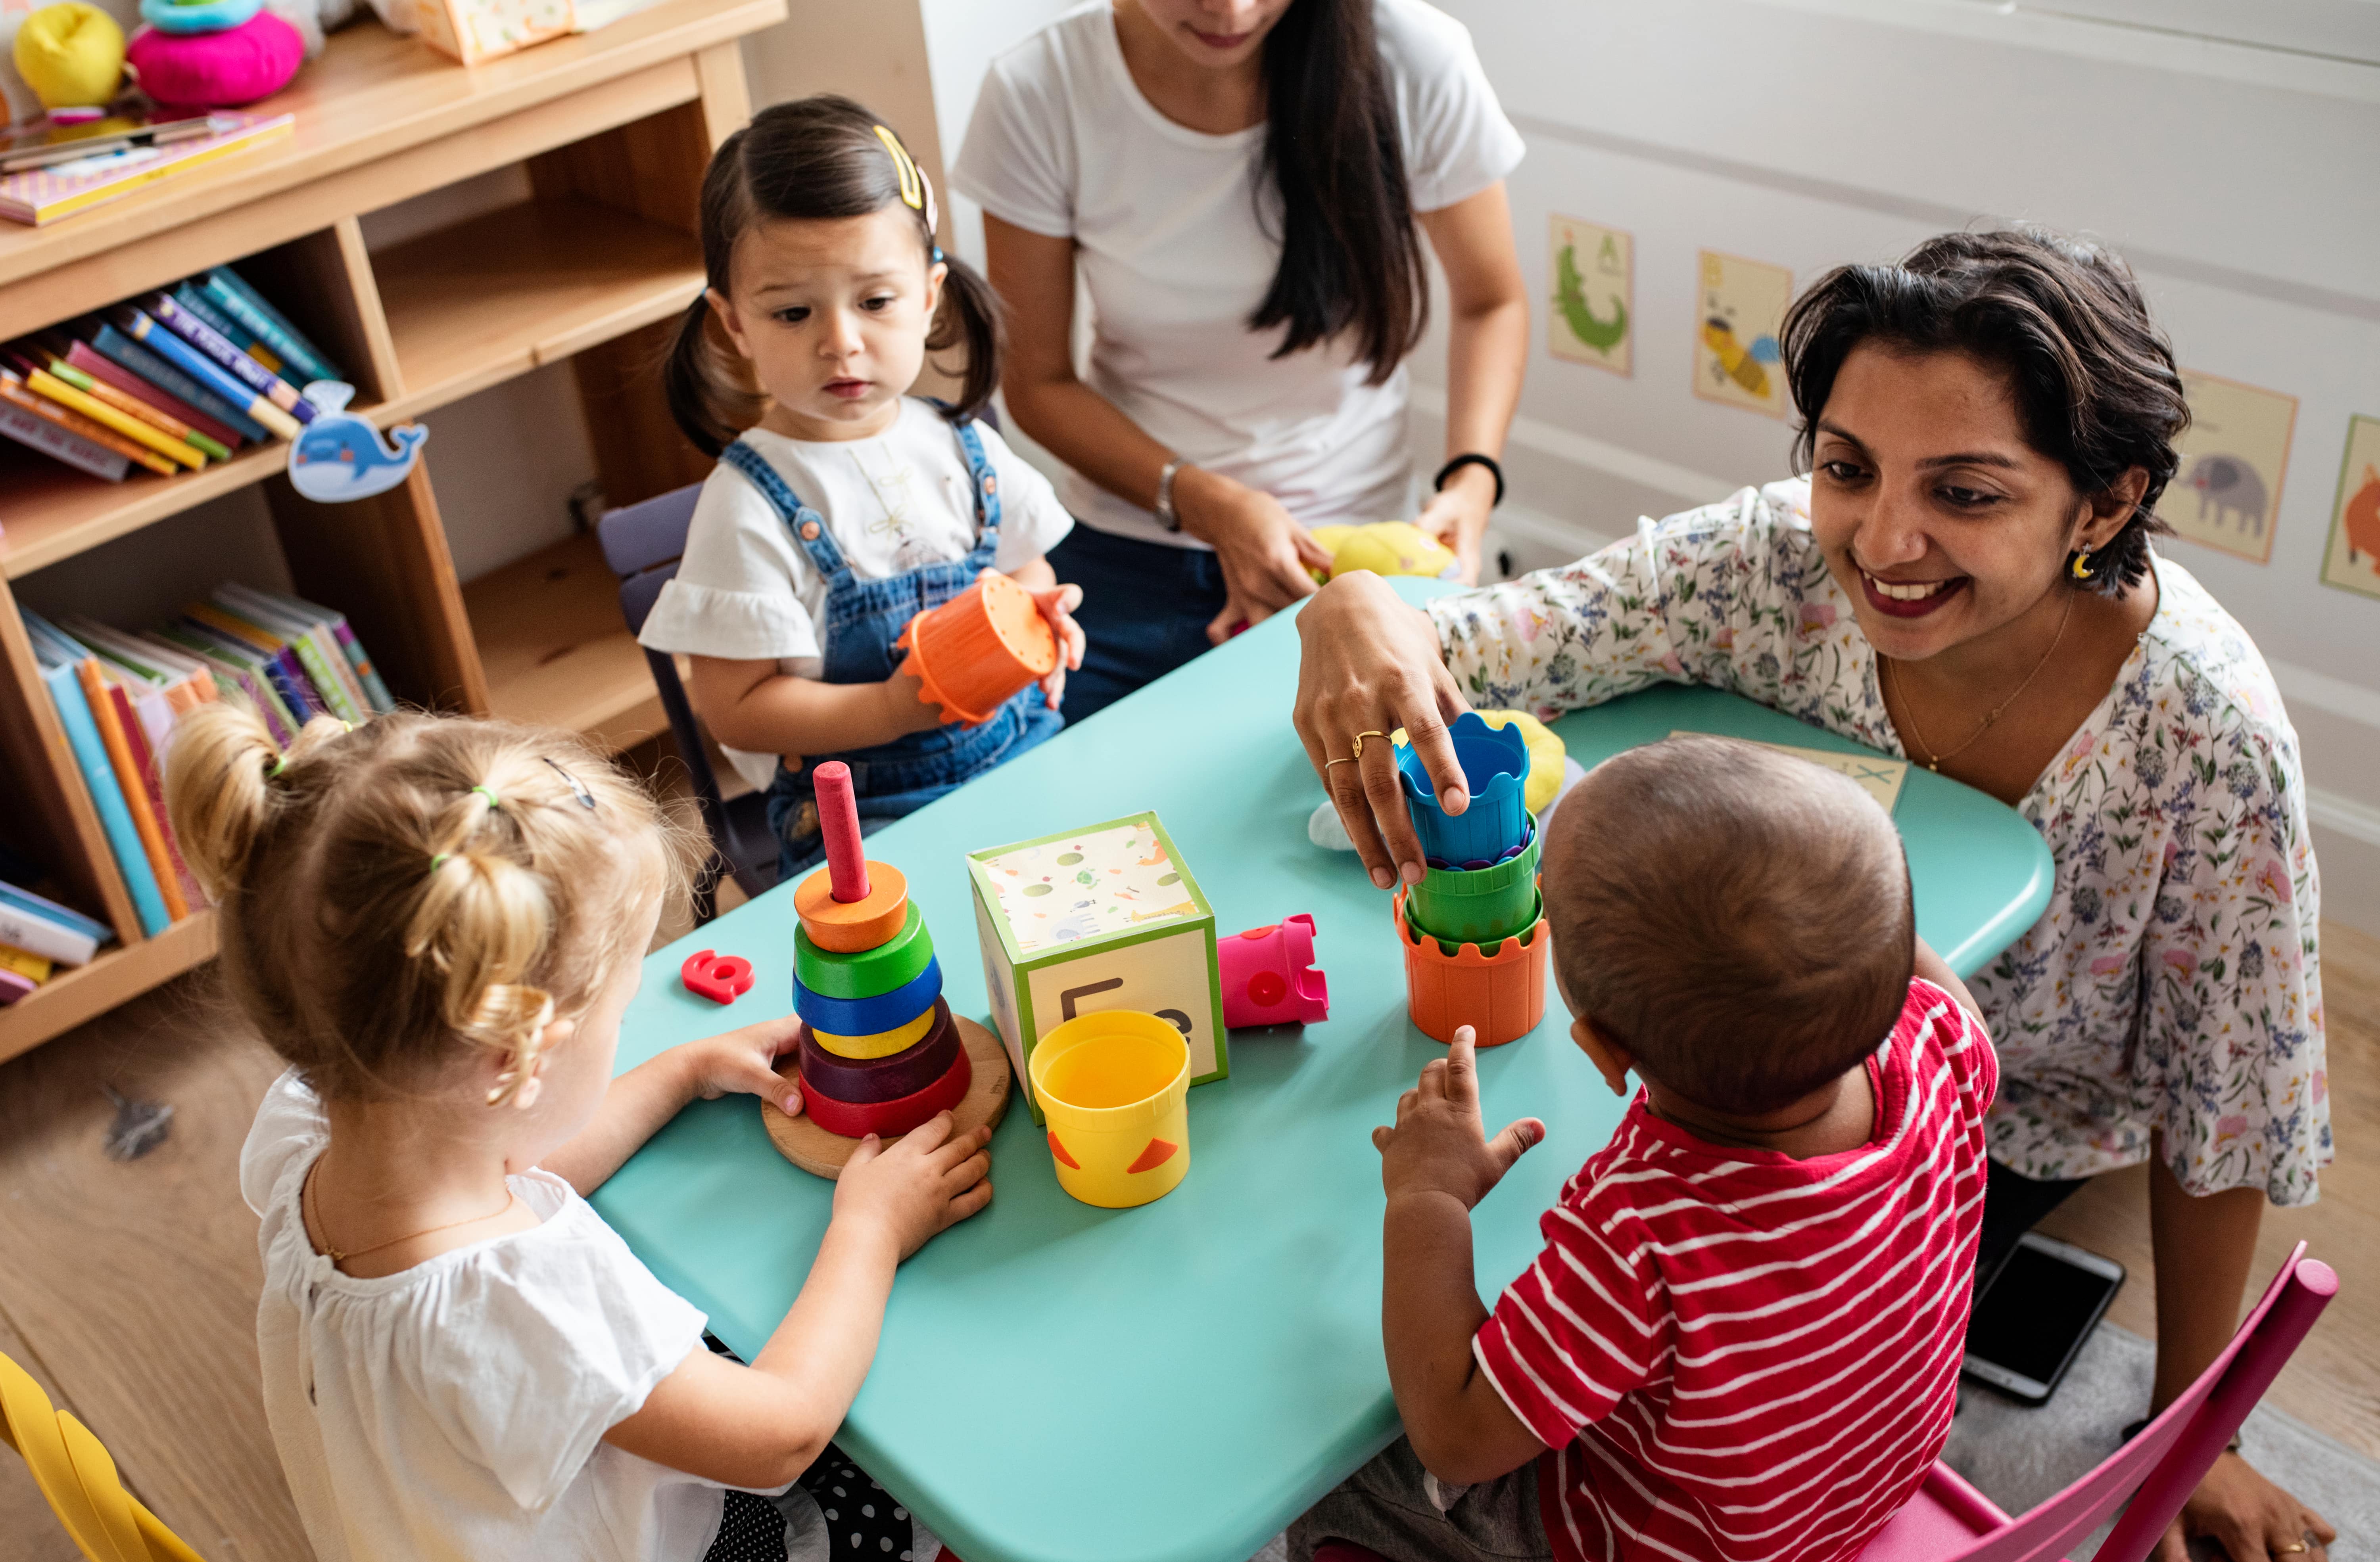 Teacher sitting at the table with young children, playing with blocks. 